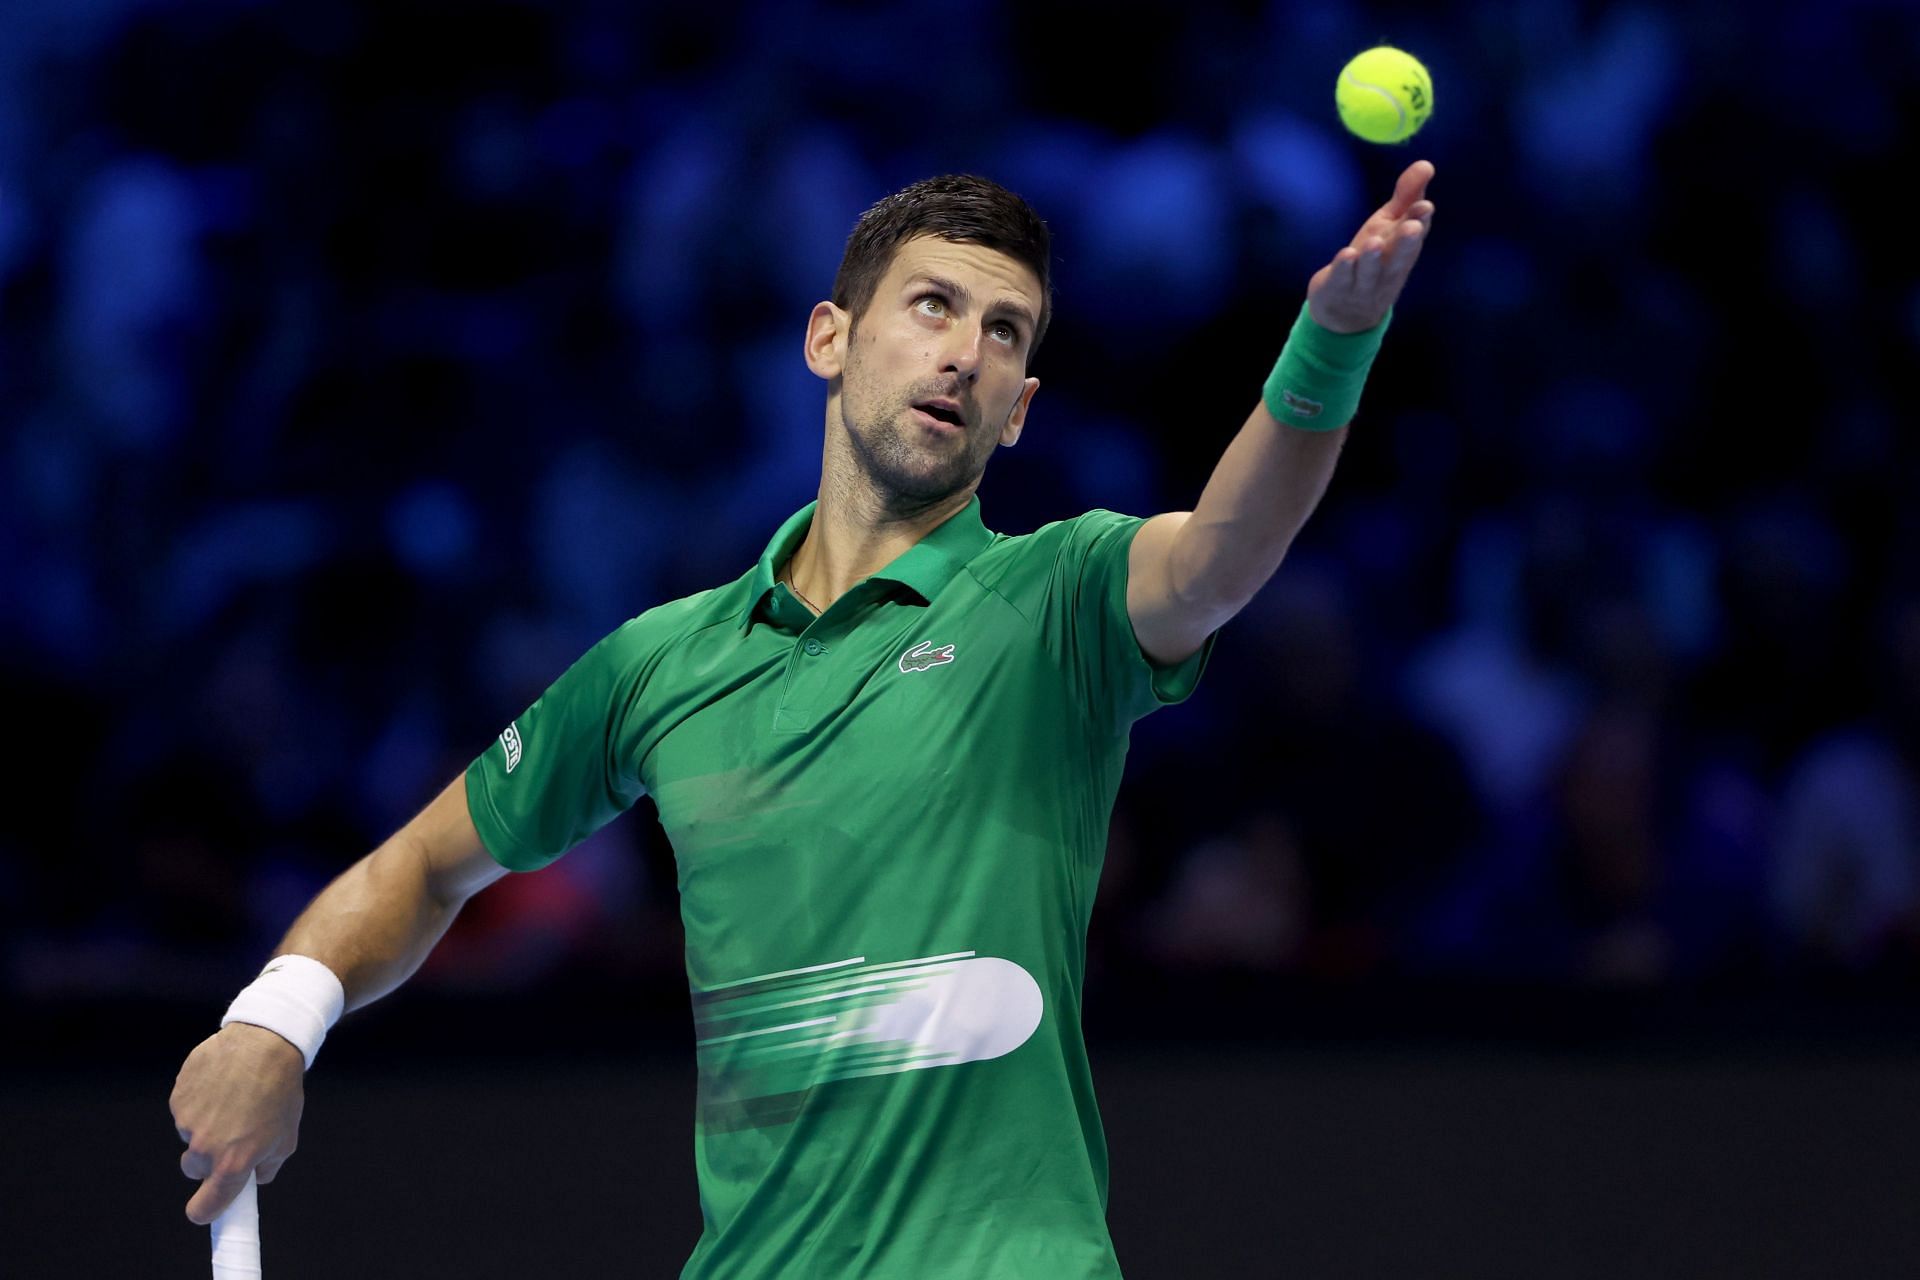 Novak Djokovic in action at the 2022 Nitto ATP Finals.